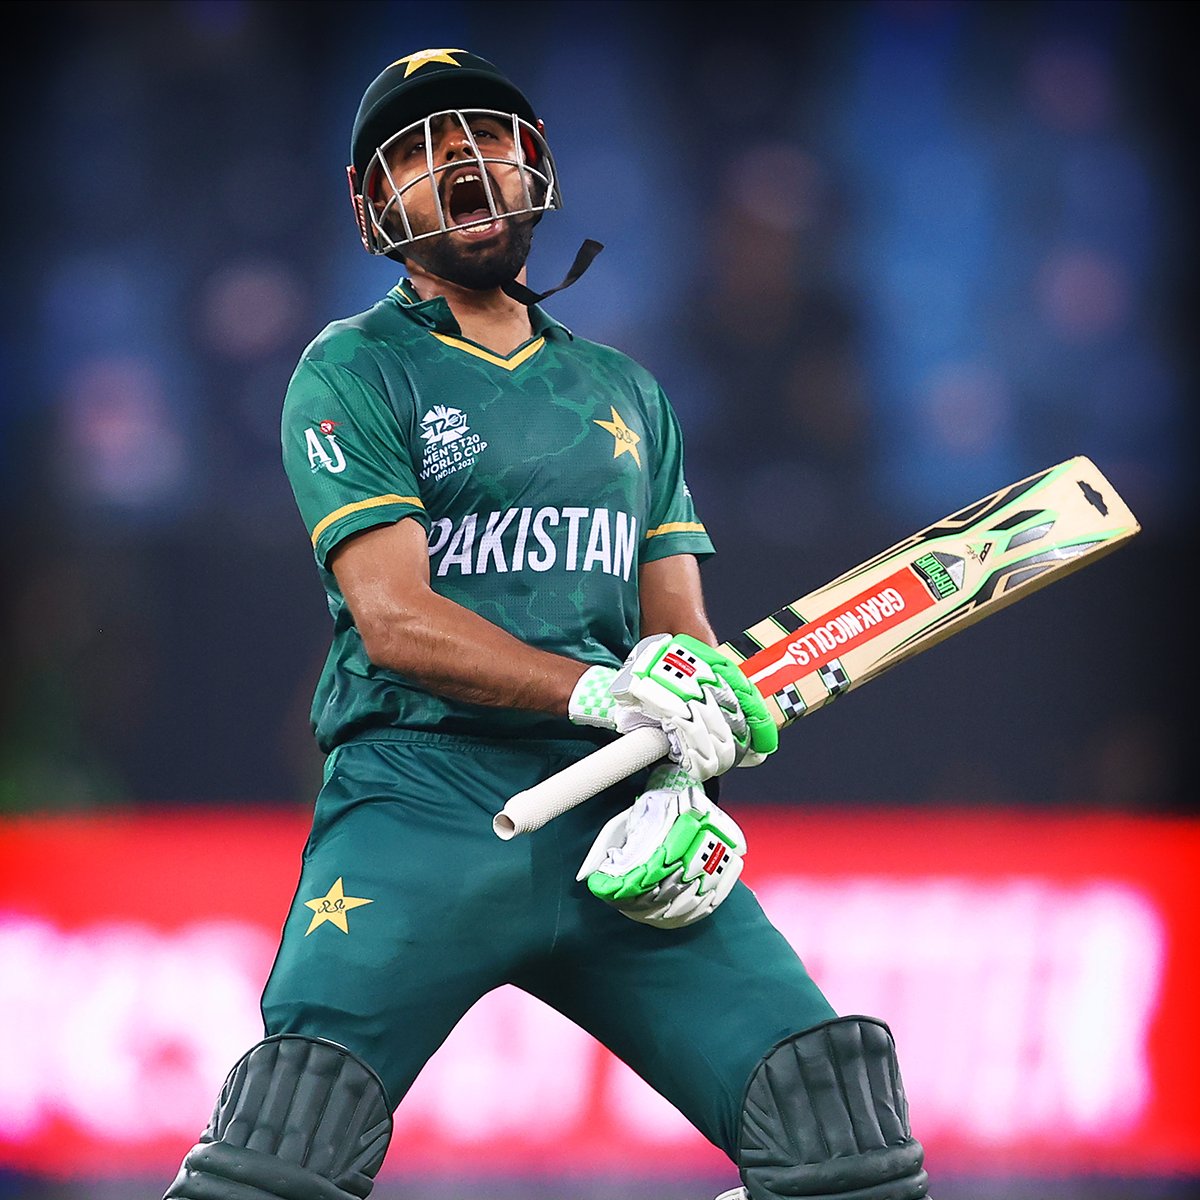 ICC World T20 2022 | Shane Watson names his top five picks for the tournament, Babar Azam leads the list